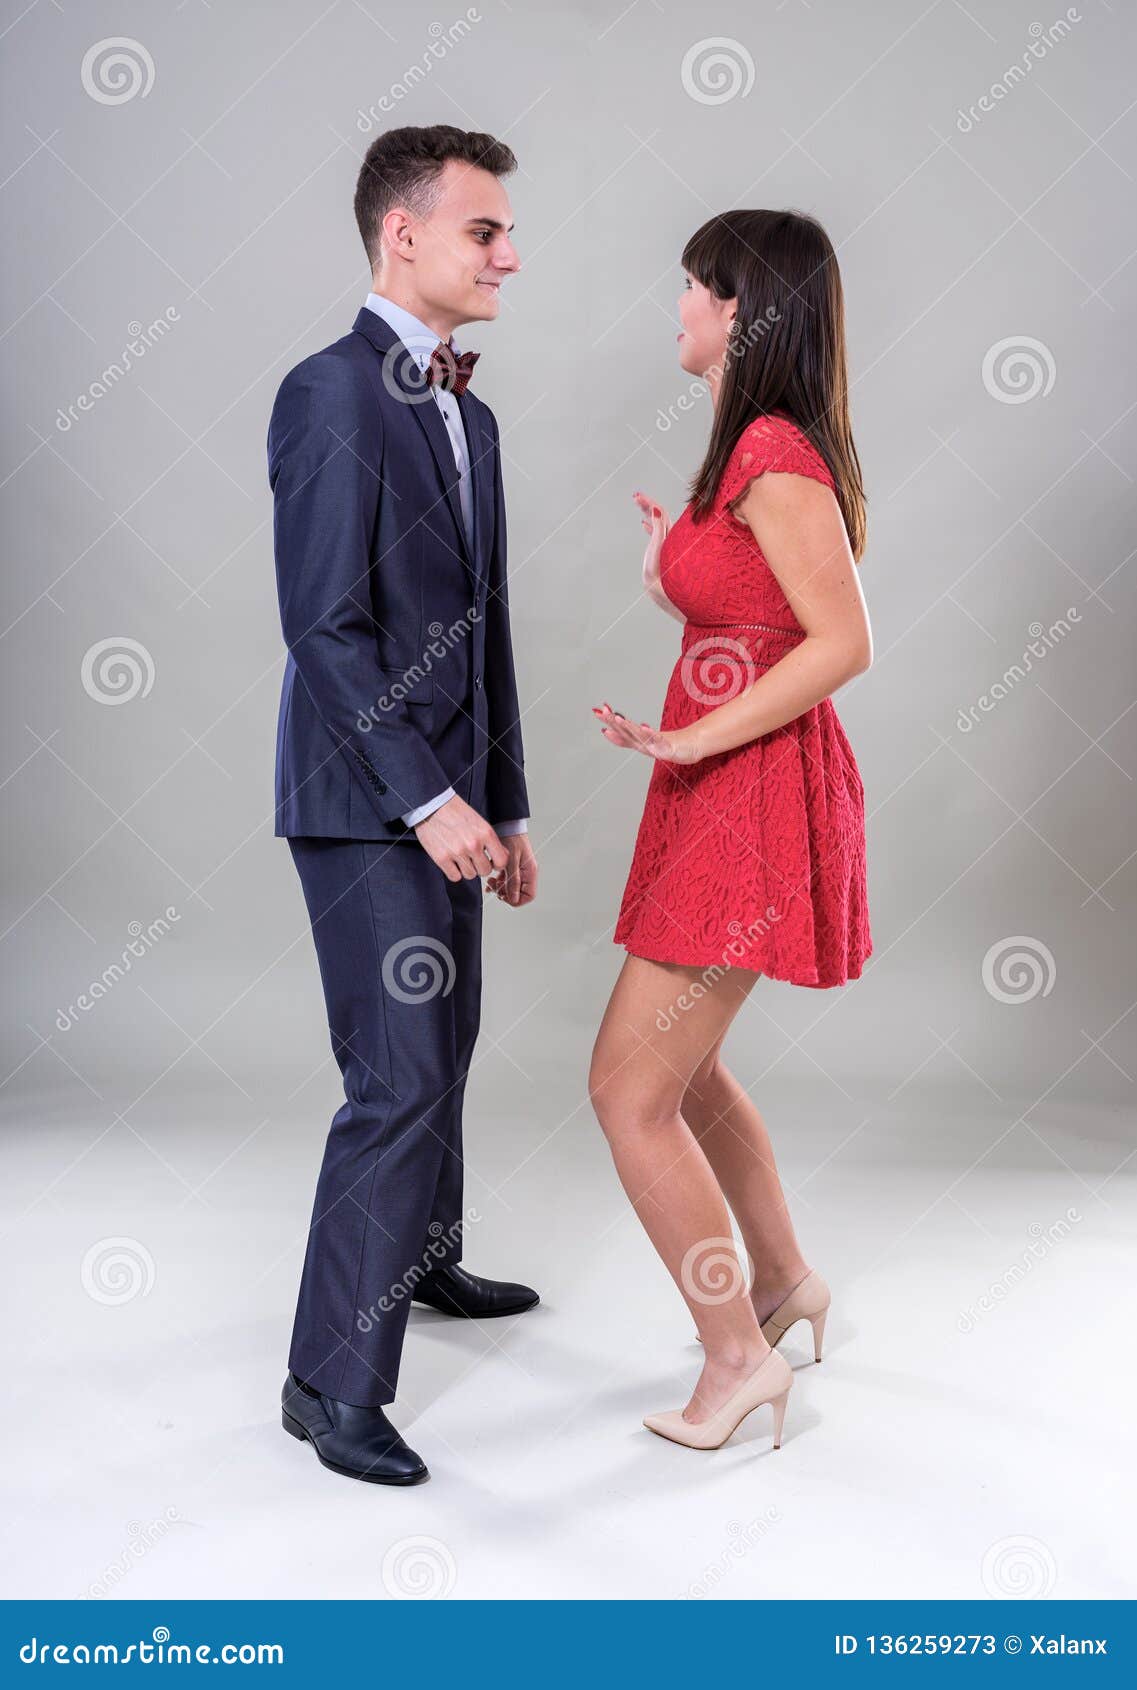 Young couple dancing stock image. Image of modern, portrait - 136259273